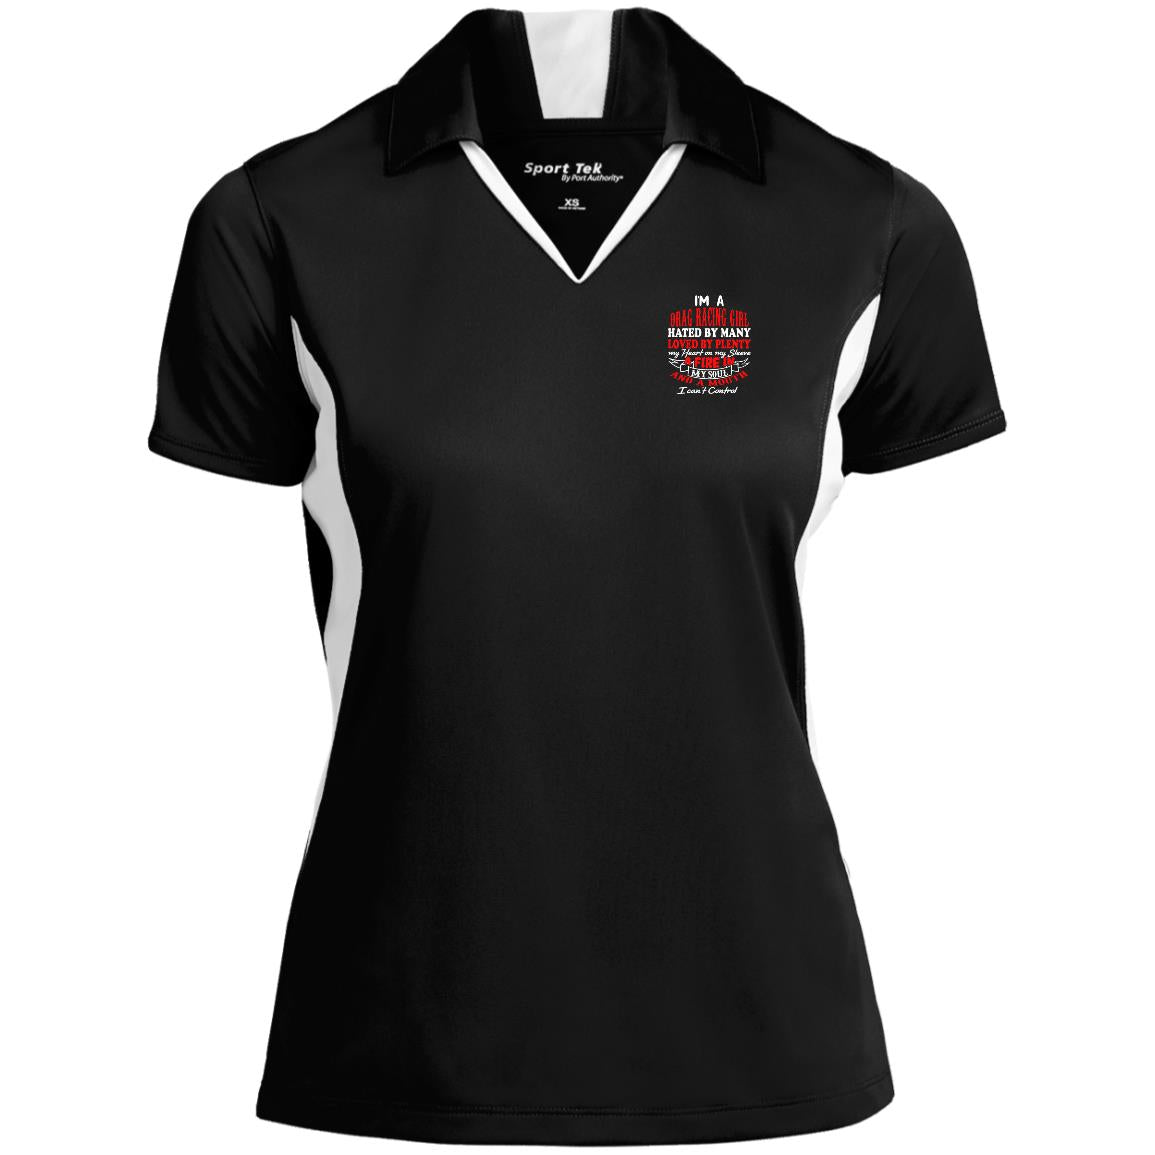 I'm A Drag Racing Girl Hated By Many Loved By Plenty Ladies' Colorblock Performance Polo